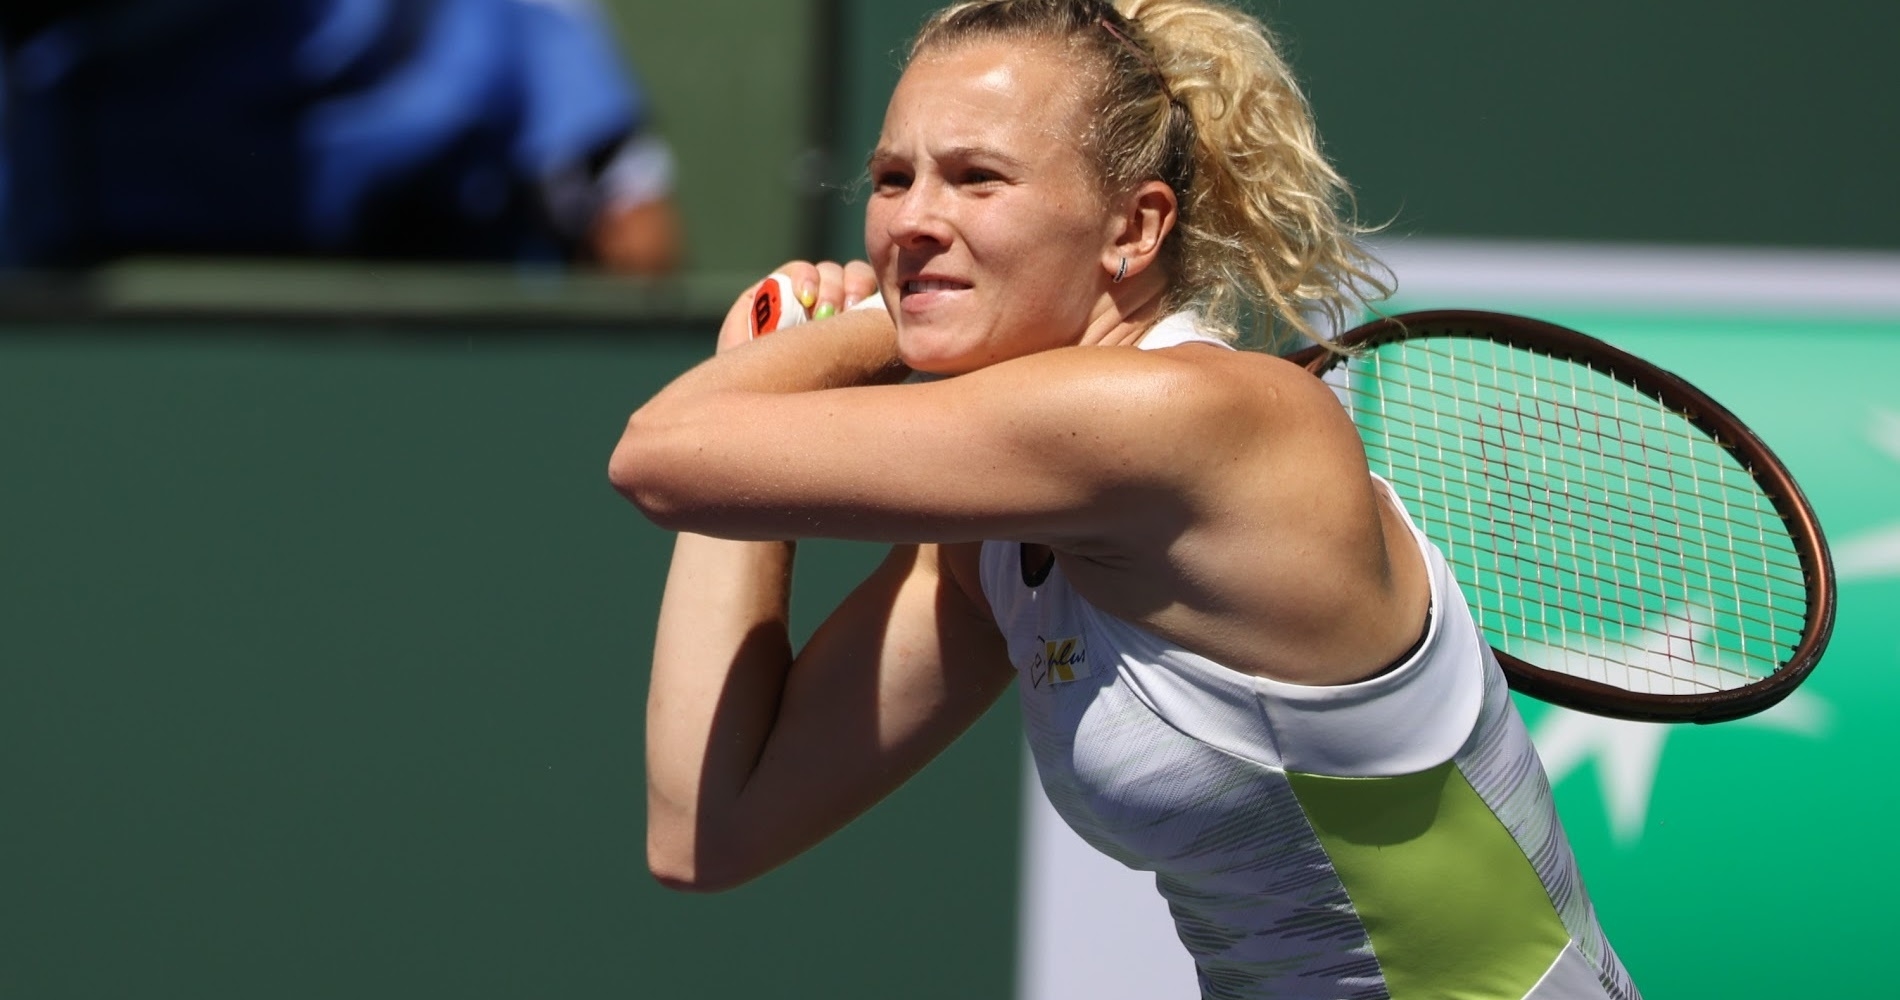 LIVE RANKINGS. Siniakova improves her rank ahead of squaring off with  Kontaveit at the Australian Open - Tennis Tonic - News, Predictions, H2H,  Live Scores, stats